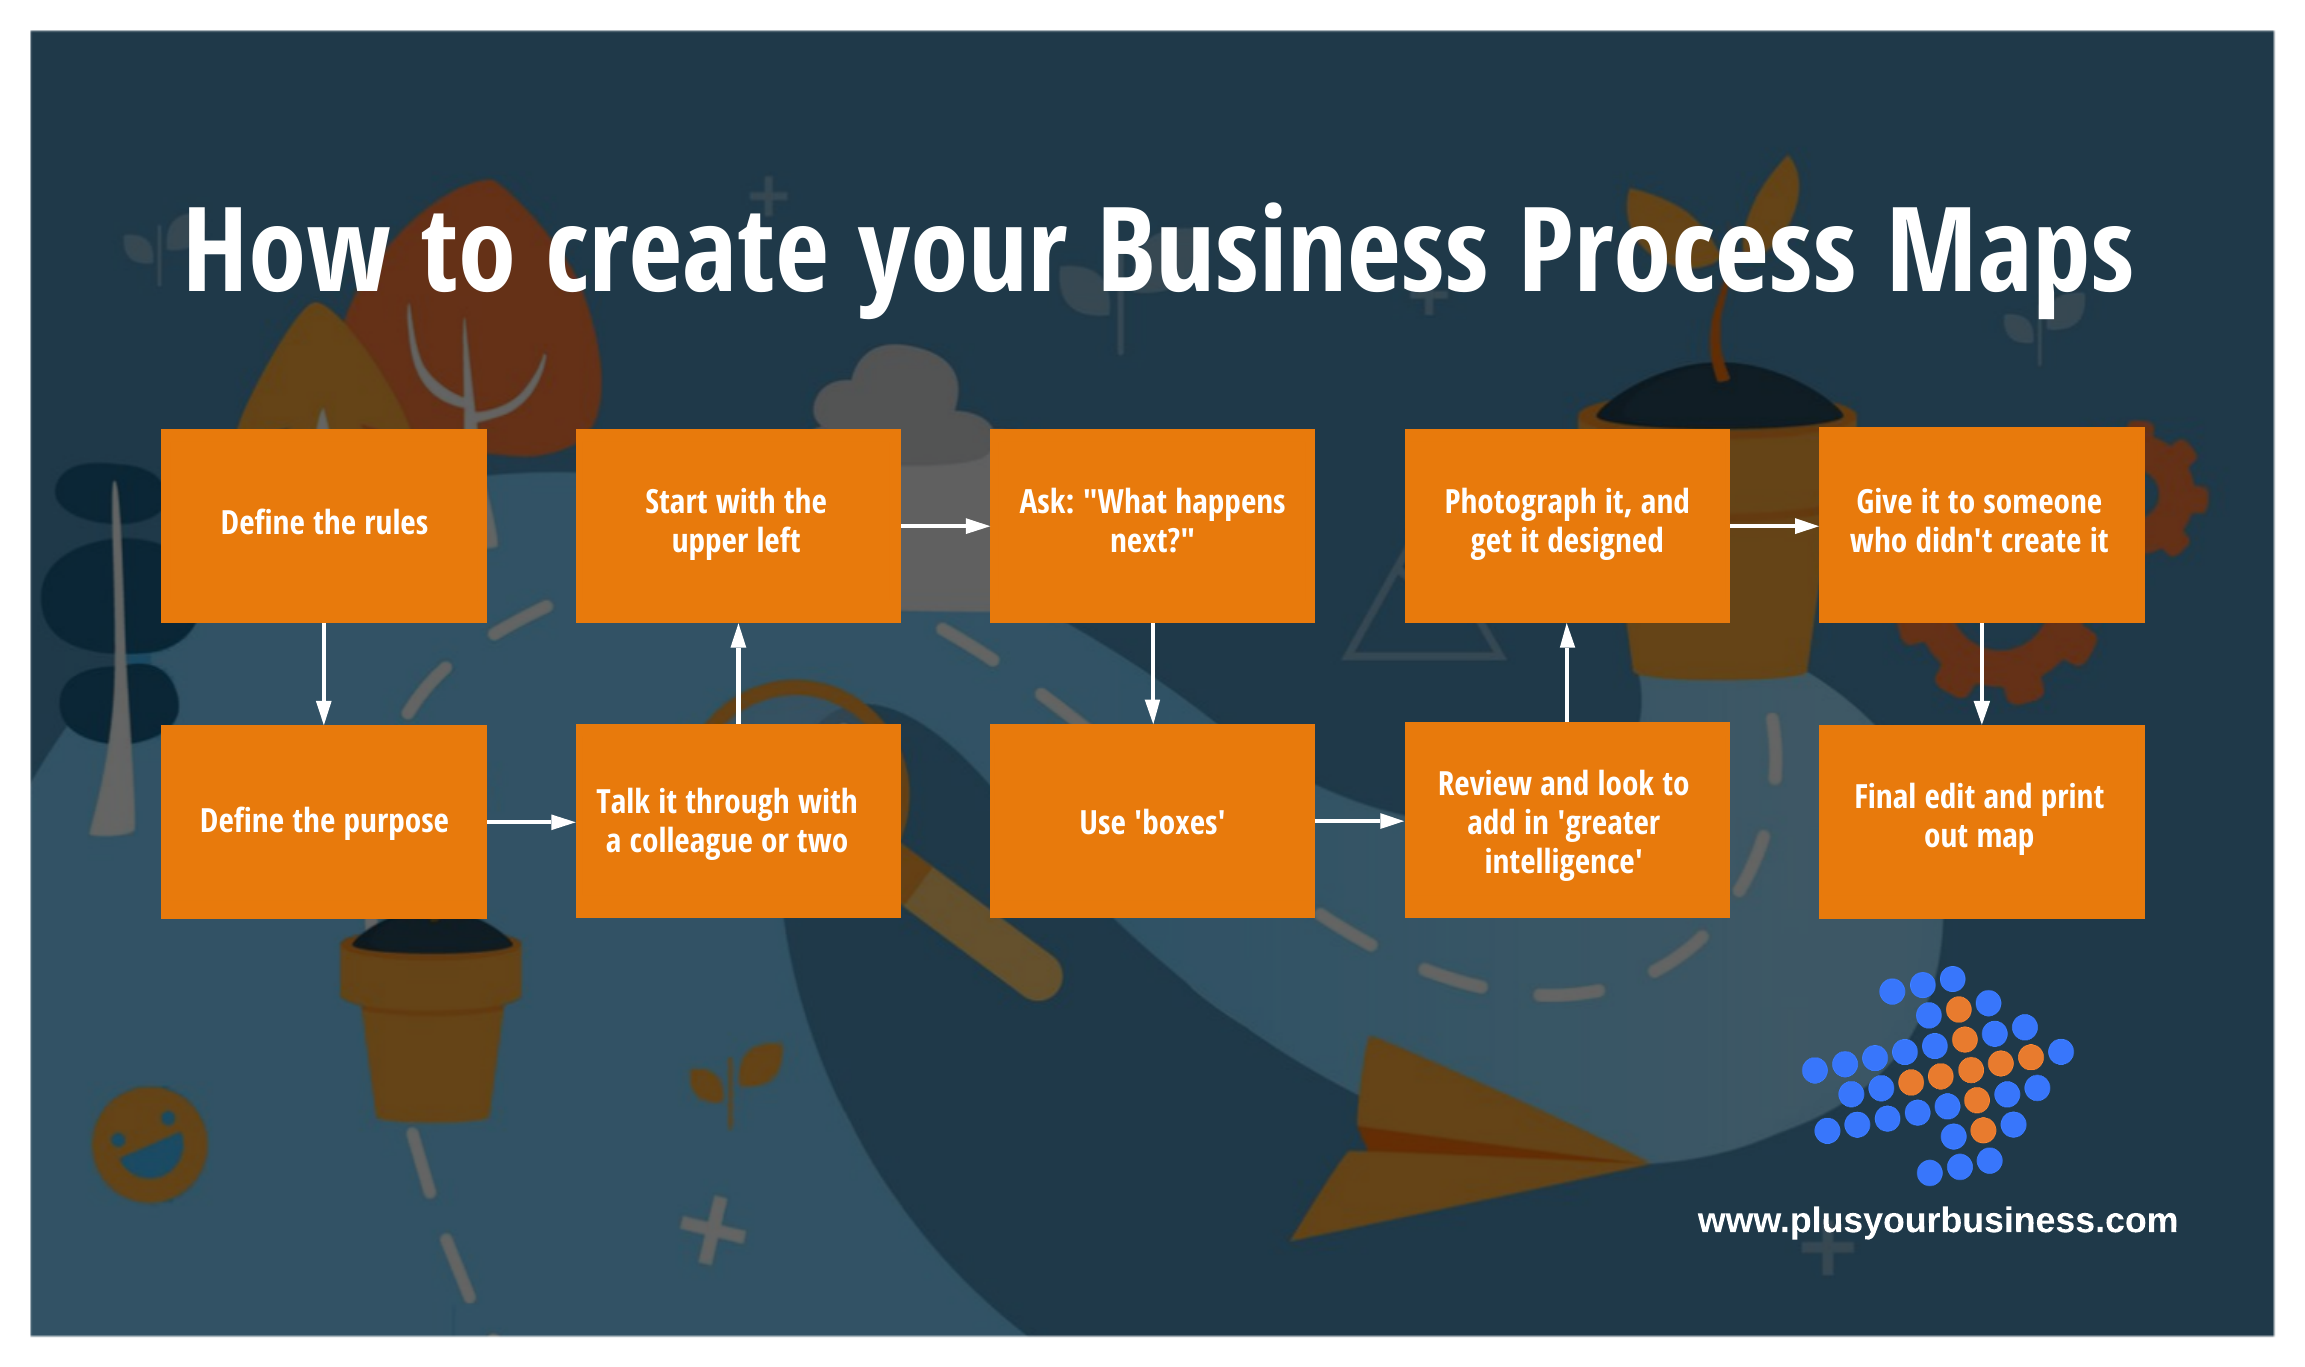 processes of a business plan